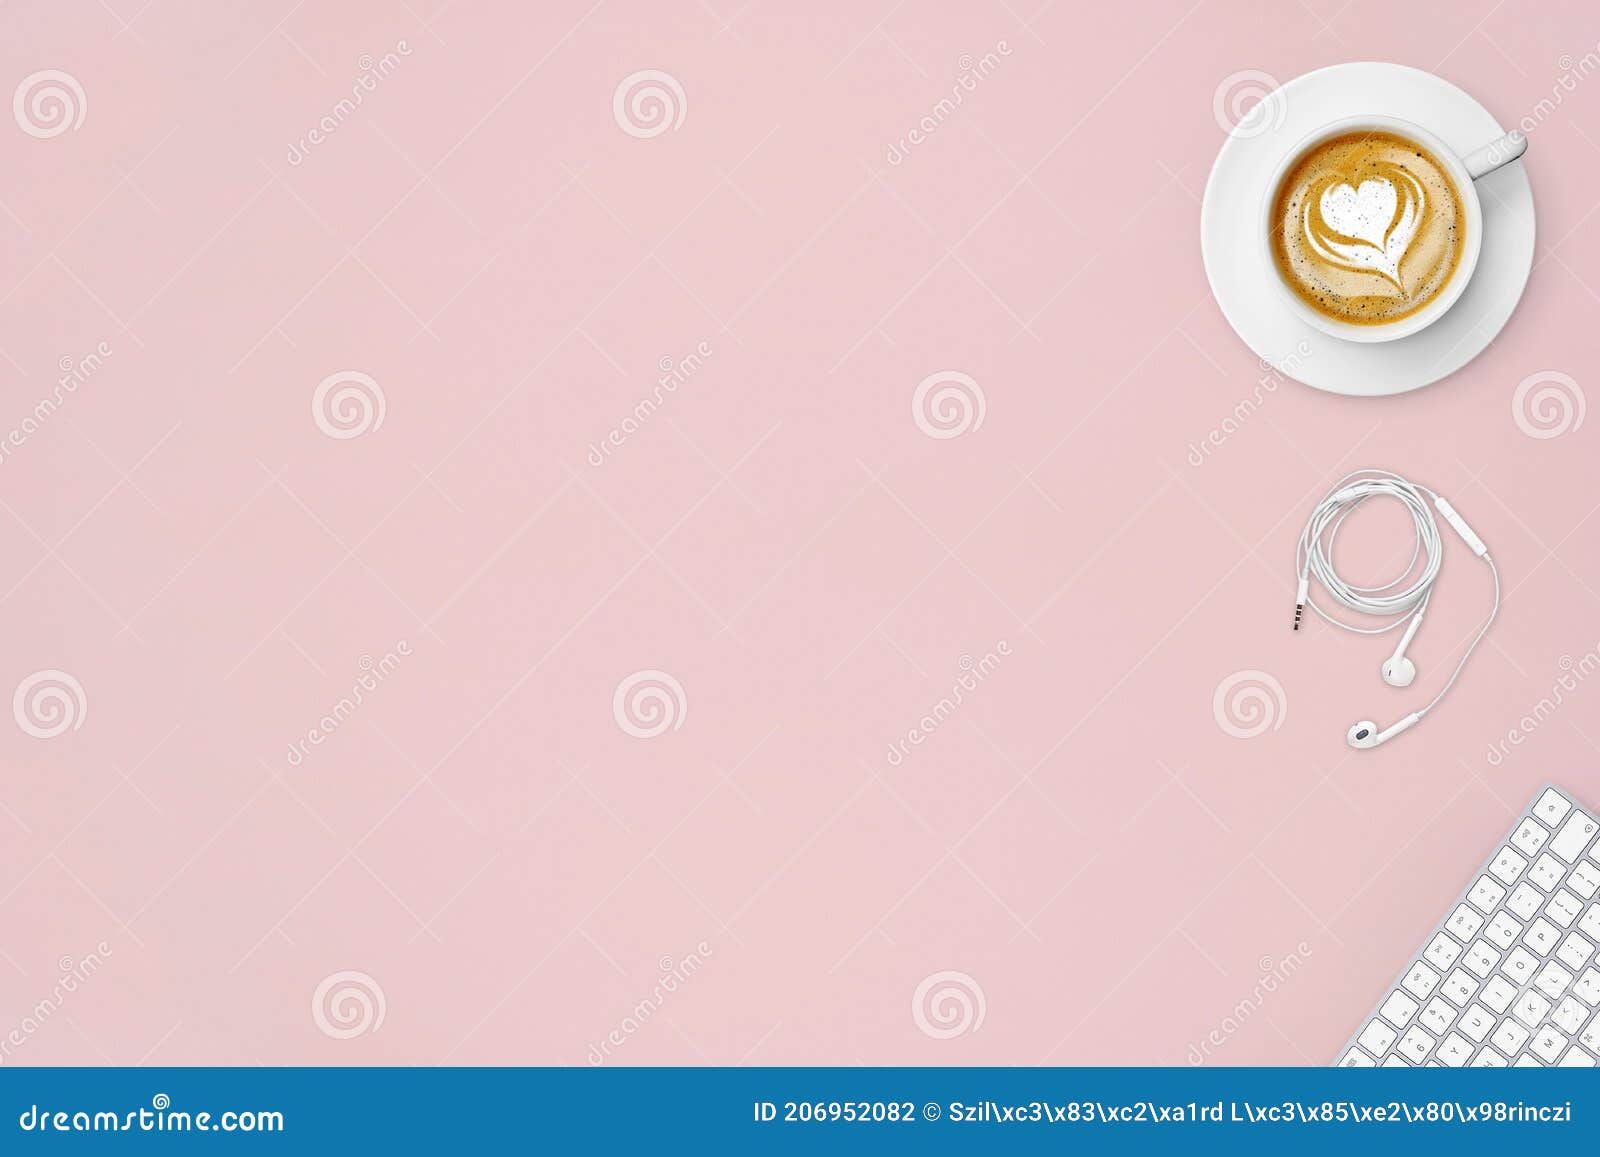 Office Table with Accessories Stock Photo - Image of background, empty ...